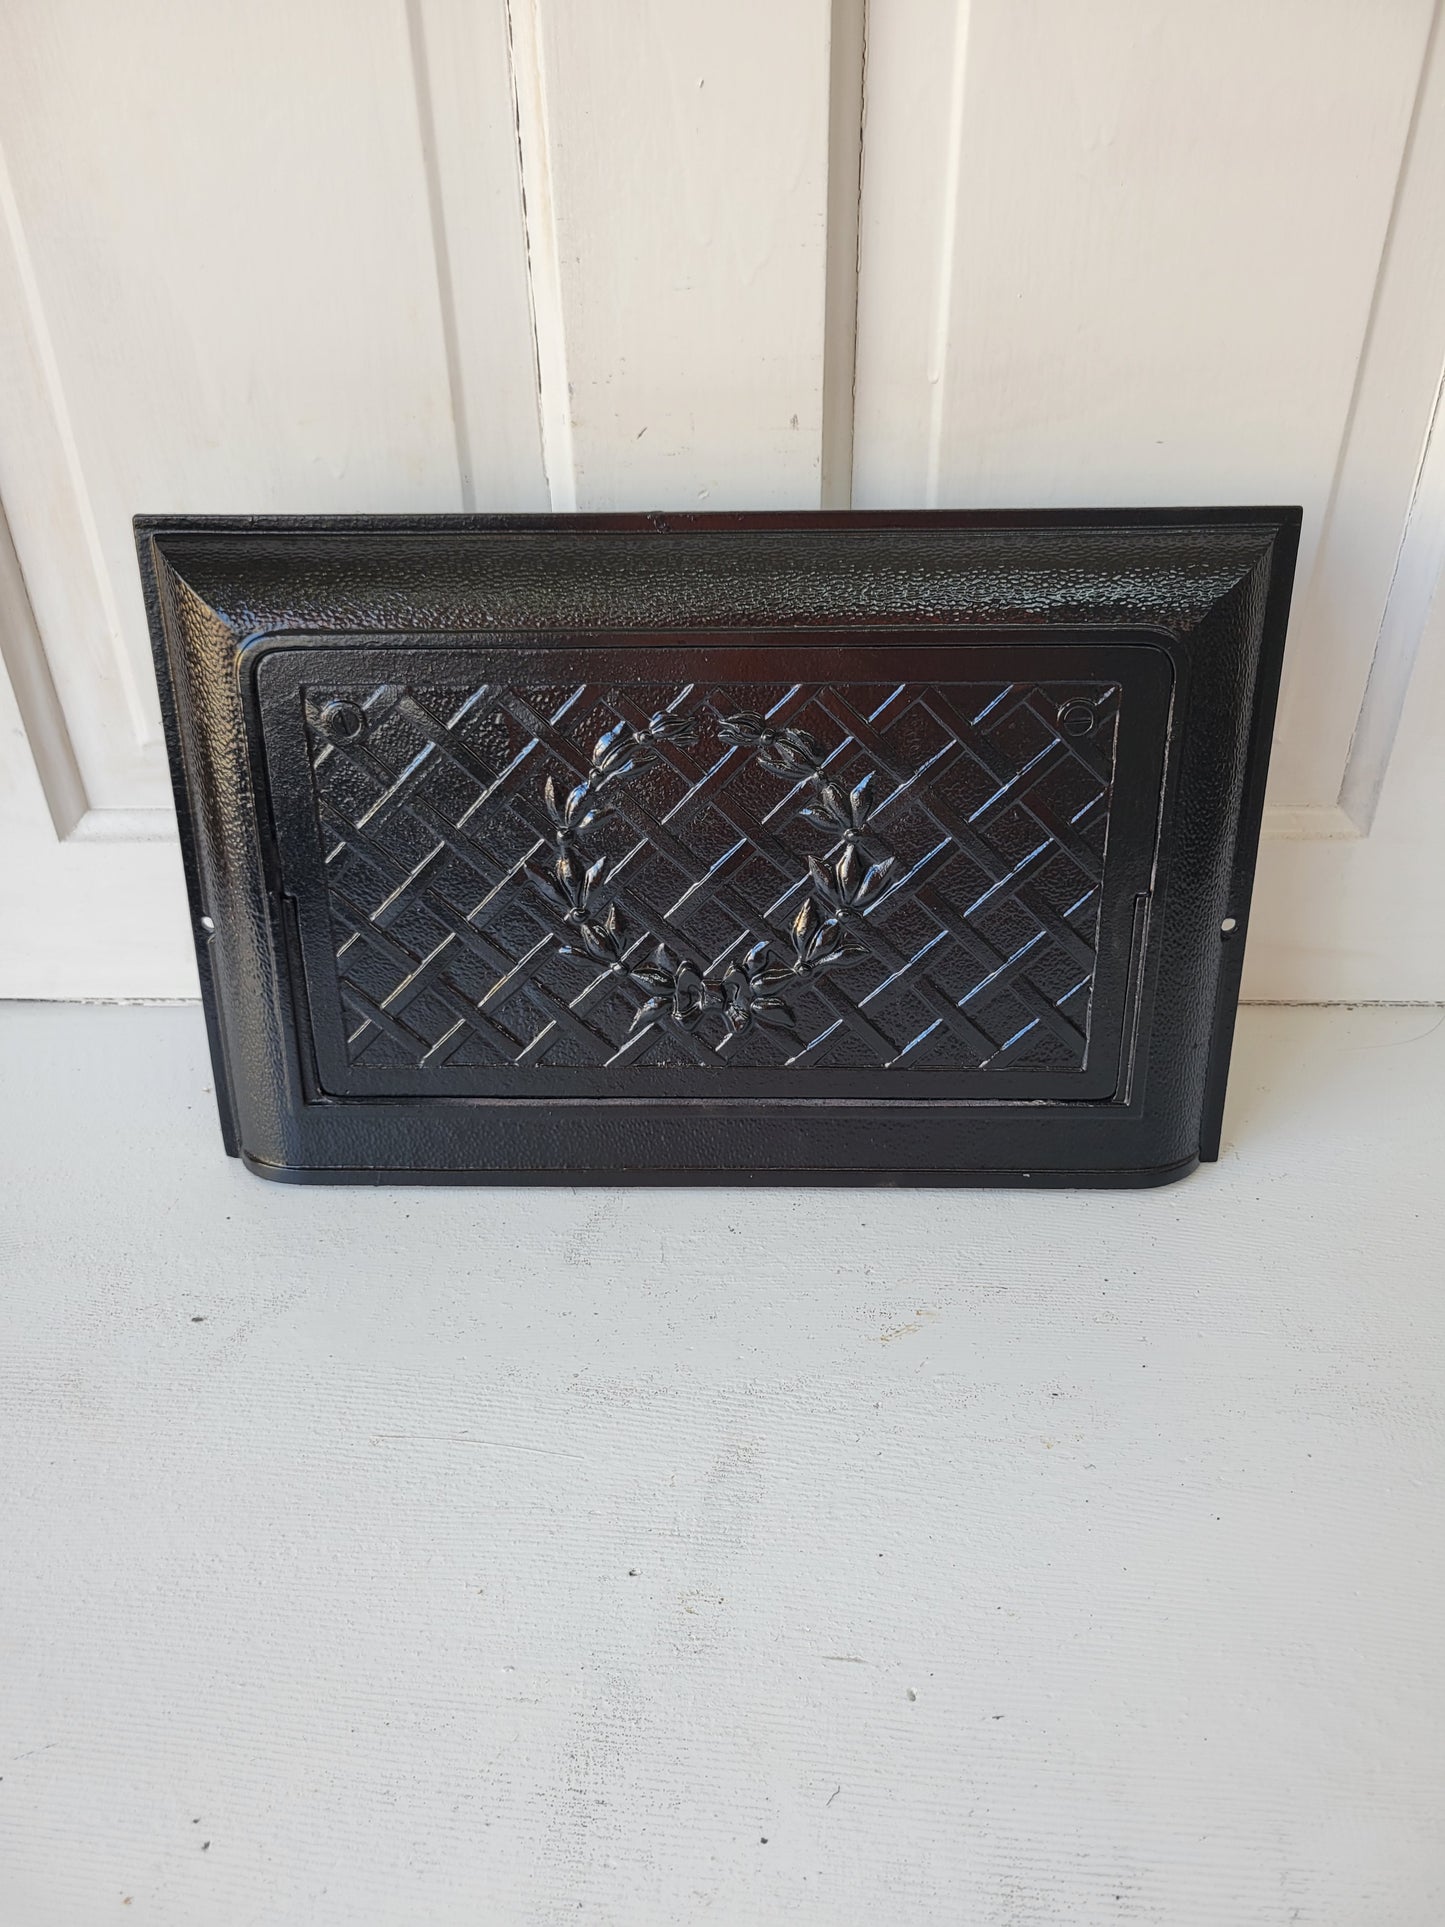 10 x 16 Fancy Cast Iron Fold Out Vent Cover, Antique Floor Register Cover with Dampers #081702